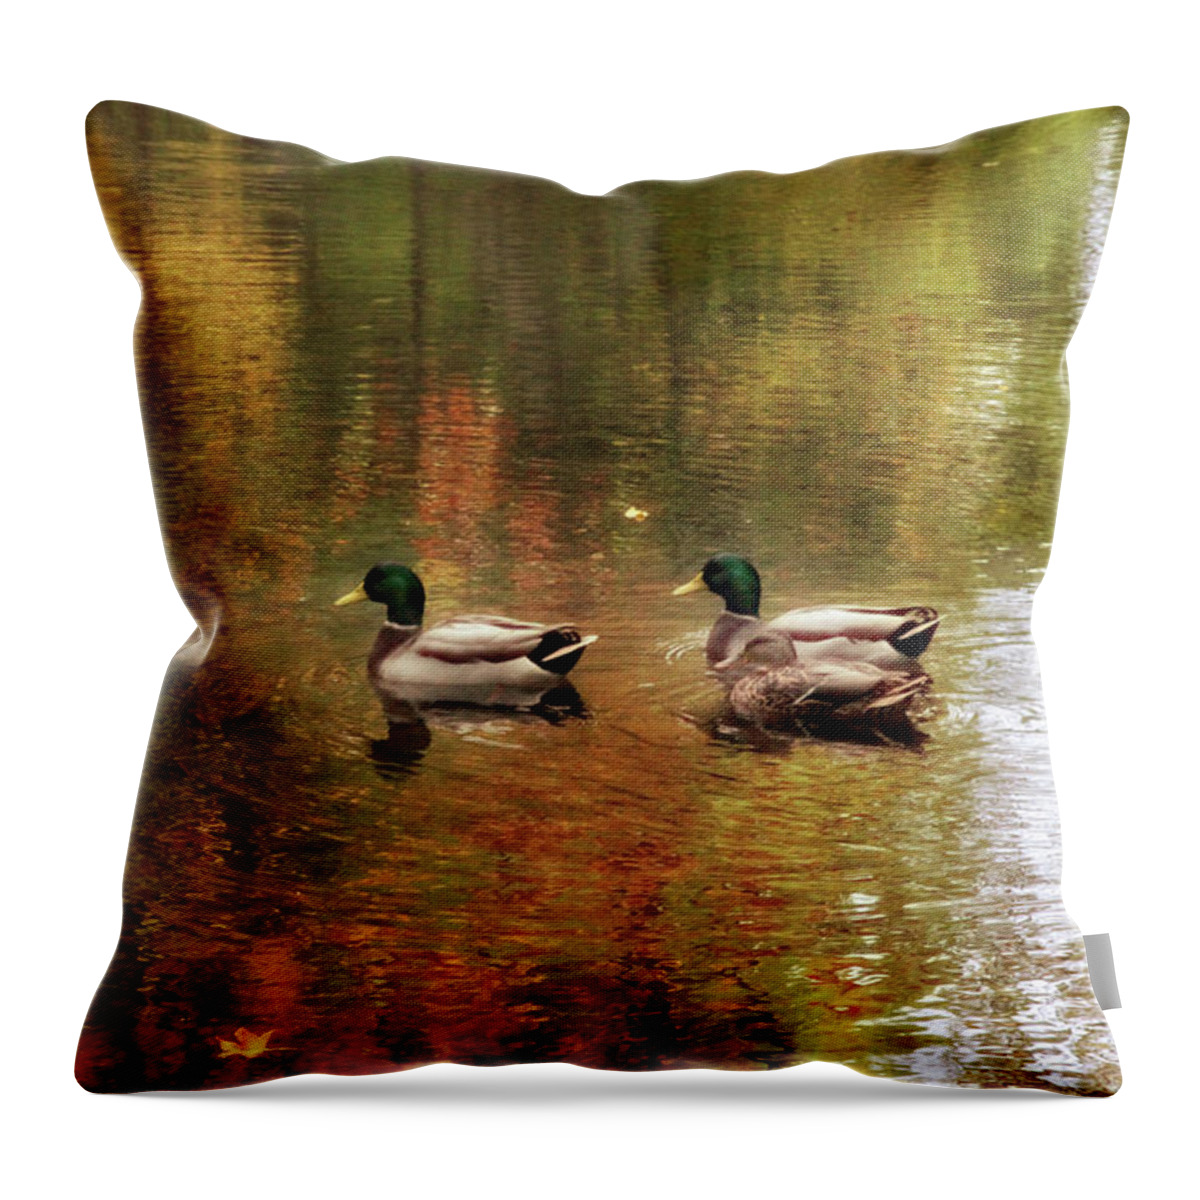 Ducks Throw Pillow featuring the photograph October Swim by Jessica Jenney